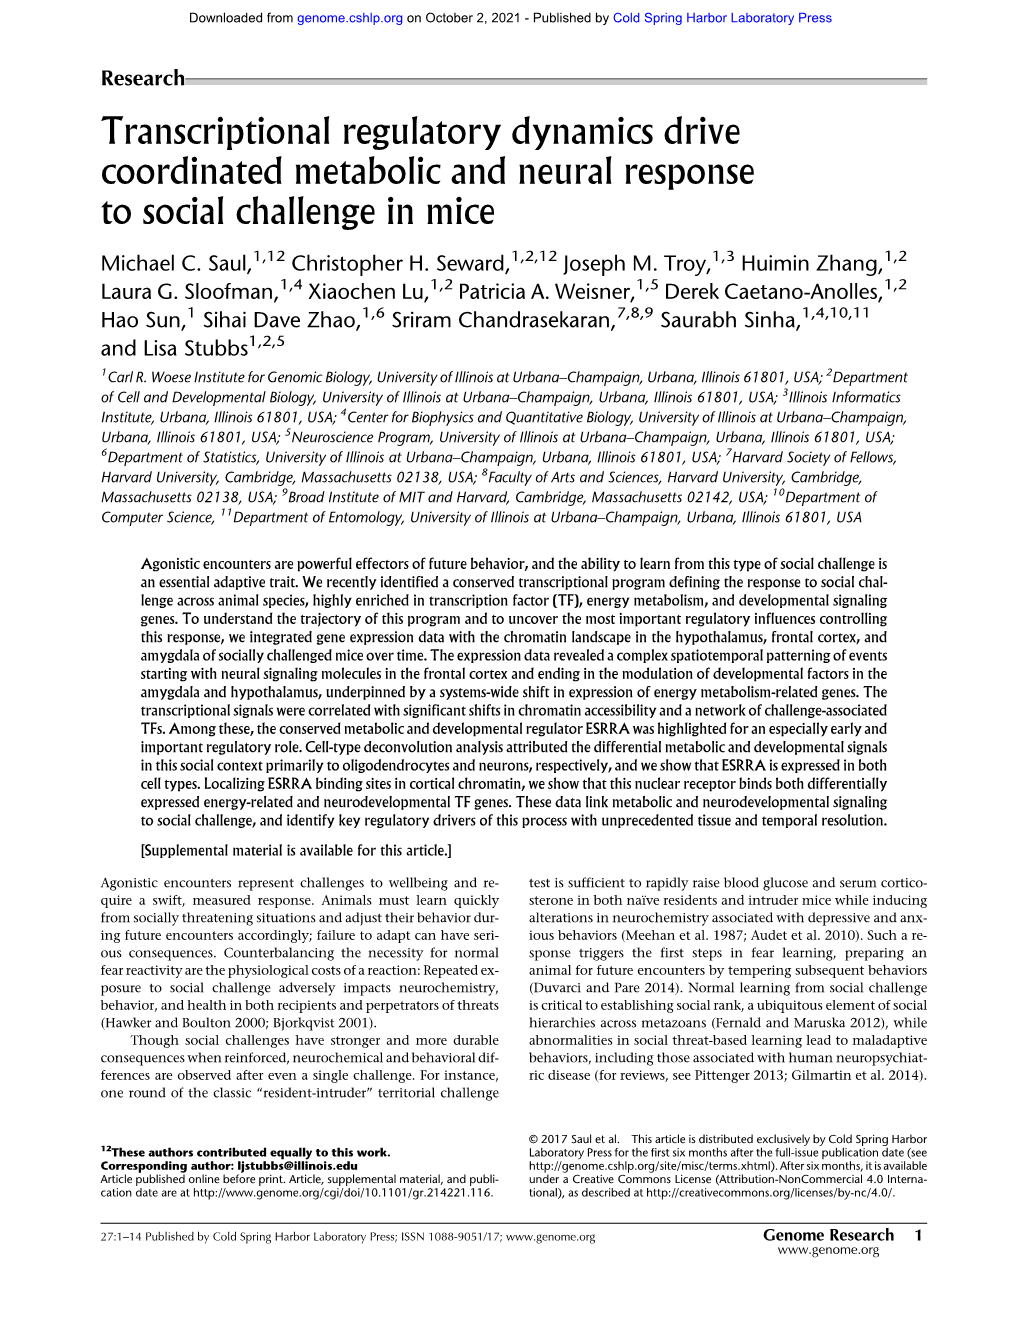 Transcriptional Regulatory Dynamics Drive Coordinated Metabolic and Neural Response to Social Challenge in Mice